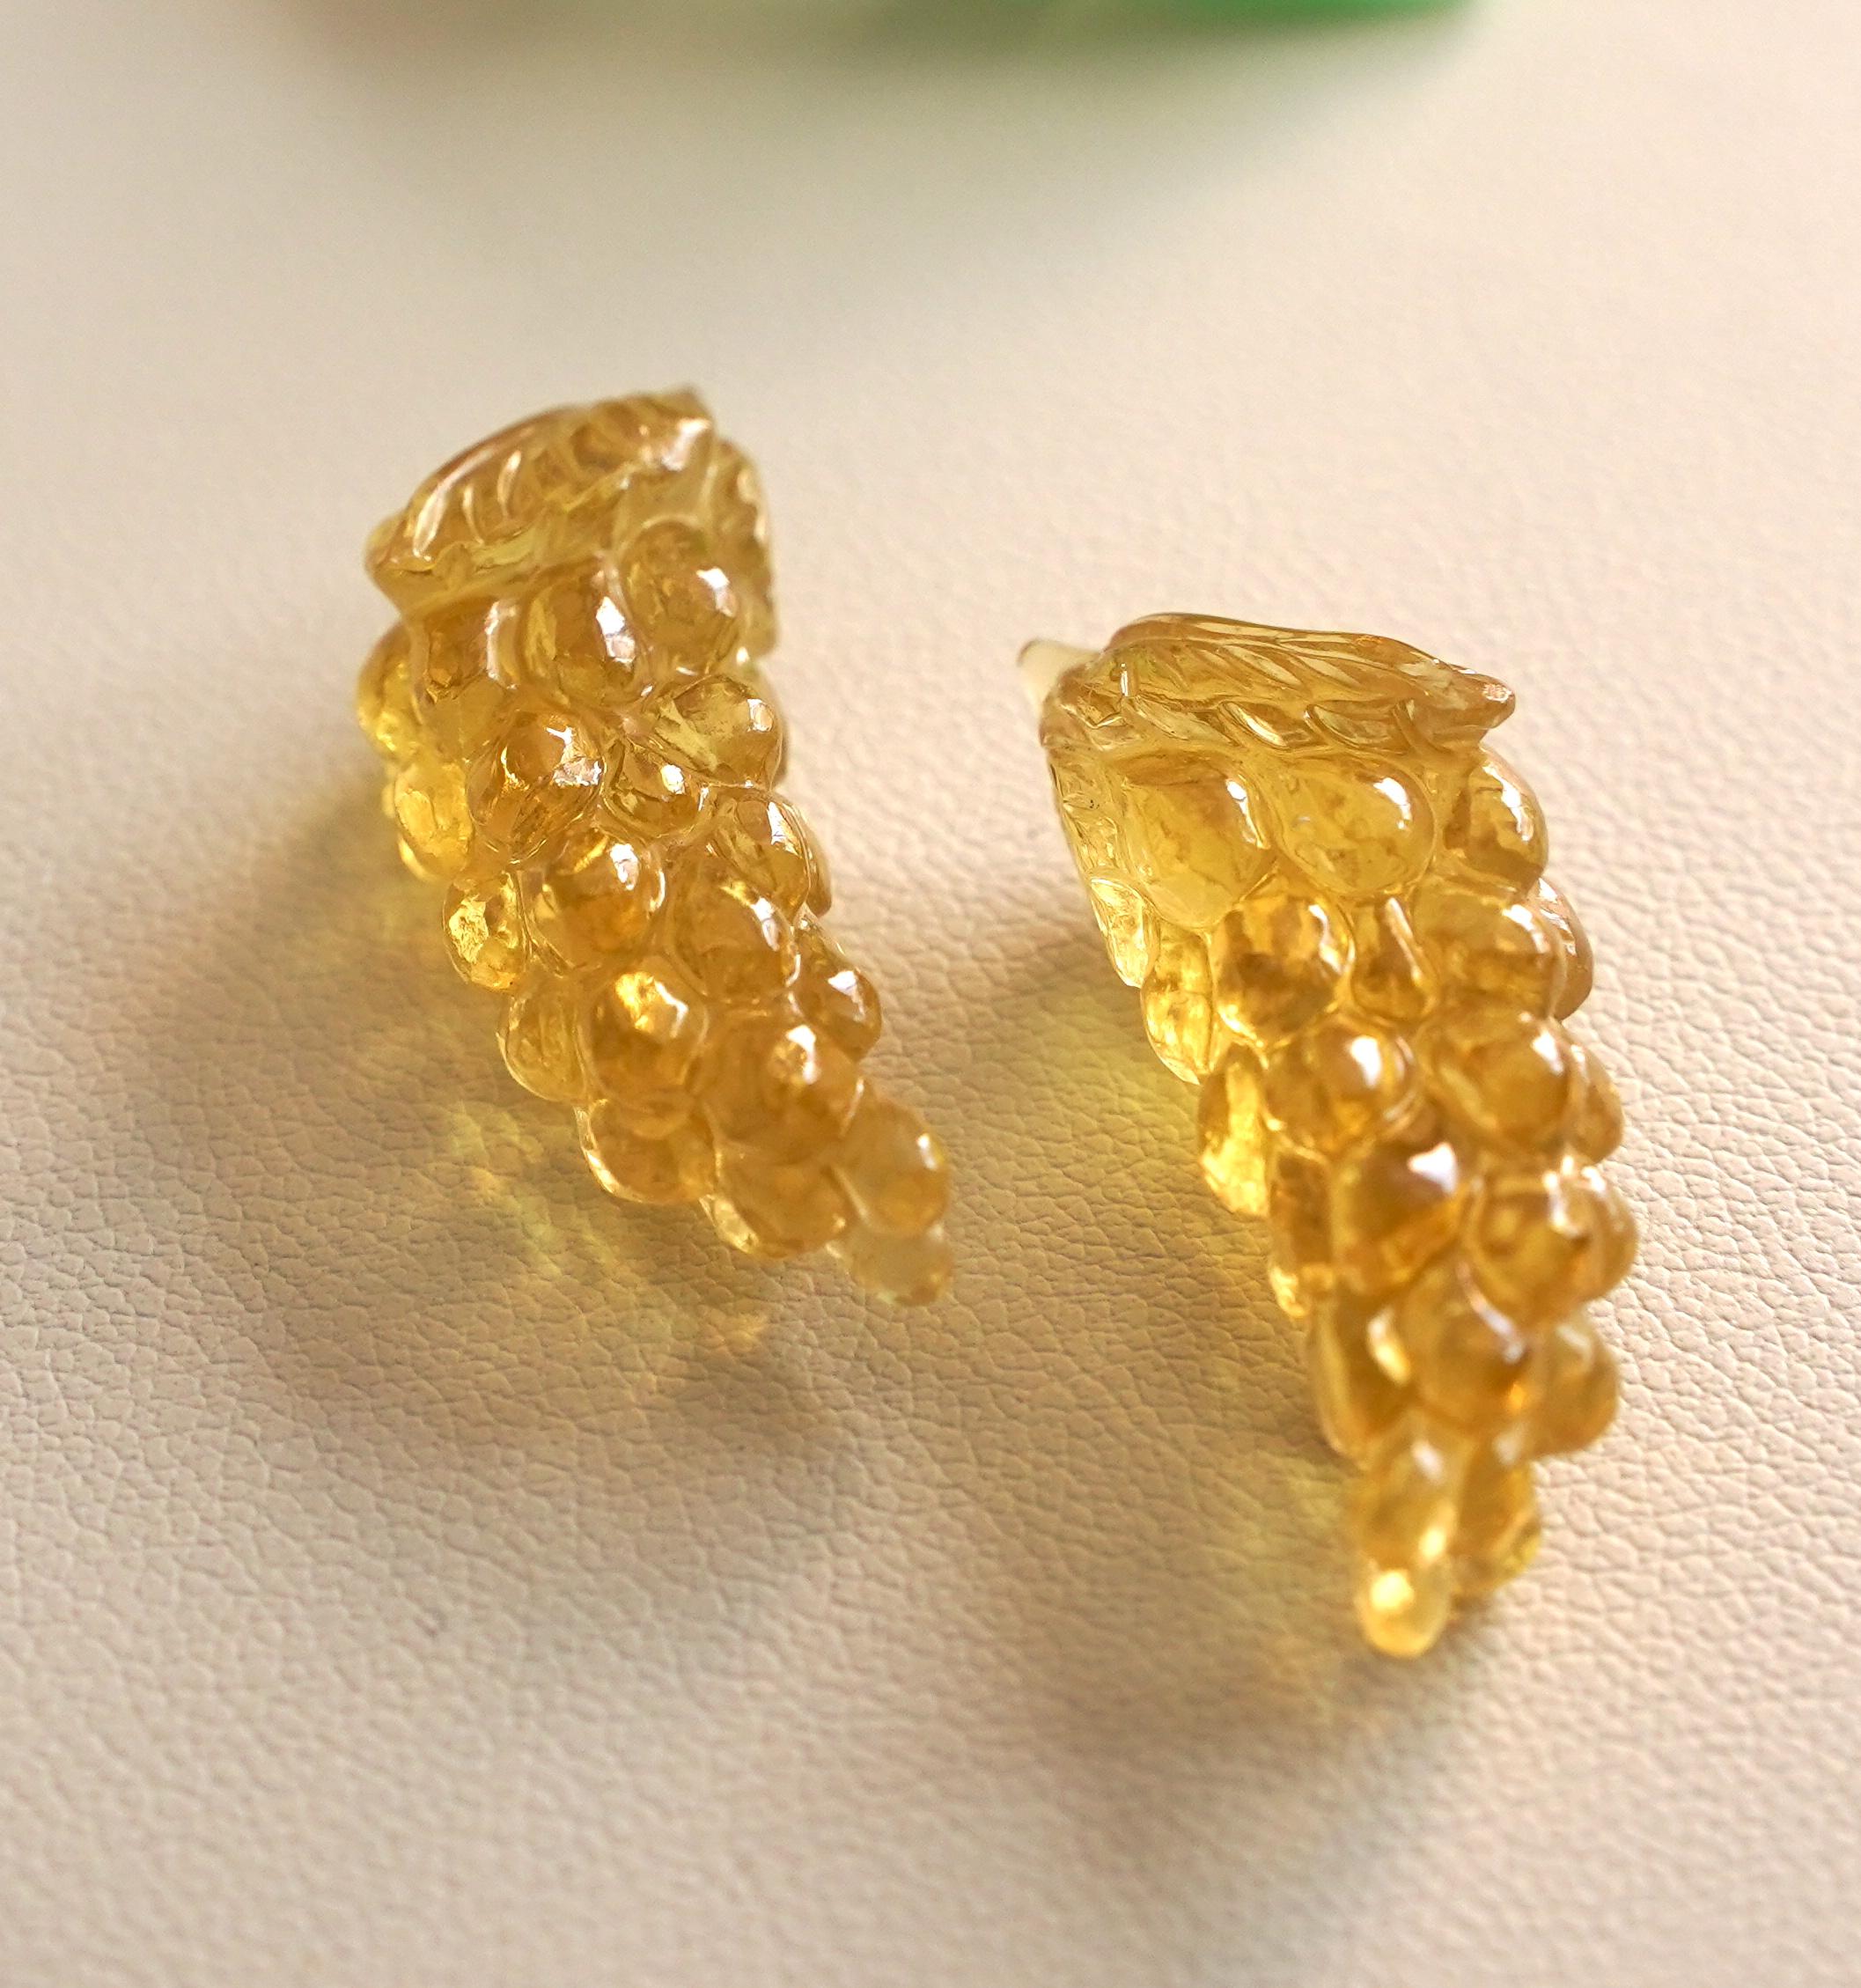 A carved pair of grapes in natural yellow apatite gemstone would make for a unique and eye-catching choice for earrings. Apatite is a gemstone that occurs in various colors, including yellow, and it is known for its vibrant hues and beautiful